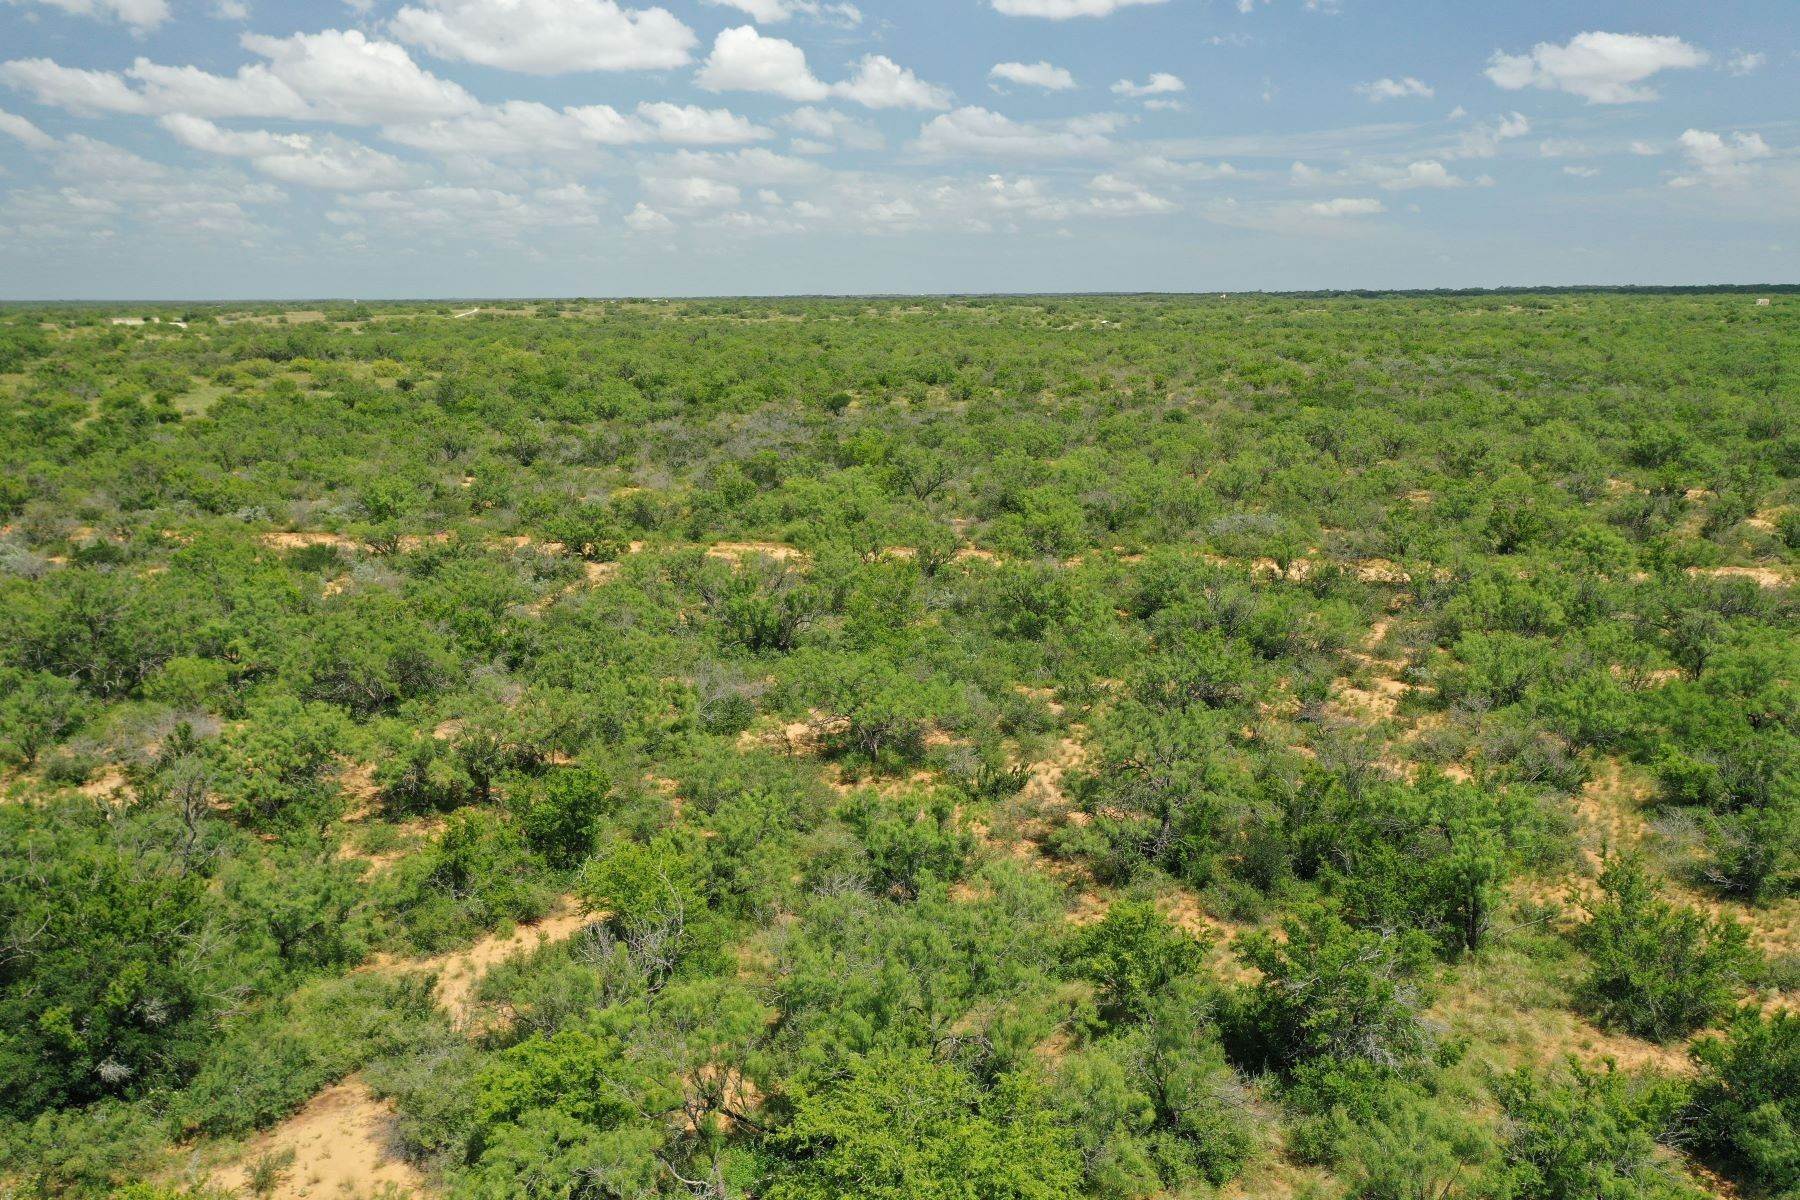 22. Farm and Ranch Properties at 2,240+/- Acres PENDENCIA RANCH, Dimmit County Carrizo Springs, Texas 78834 United States